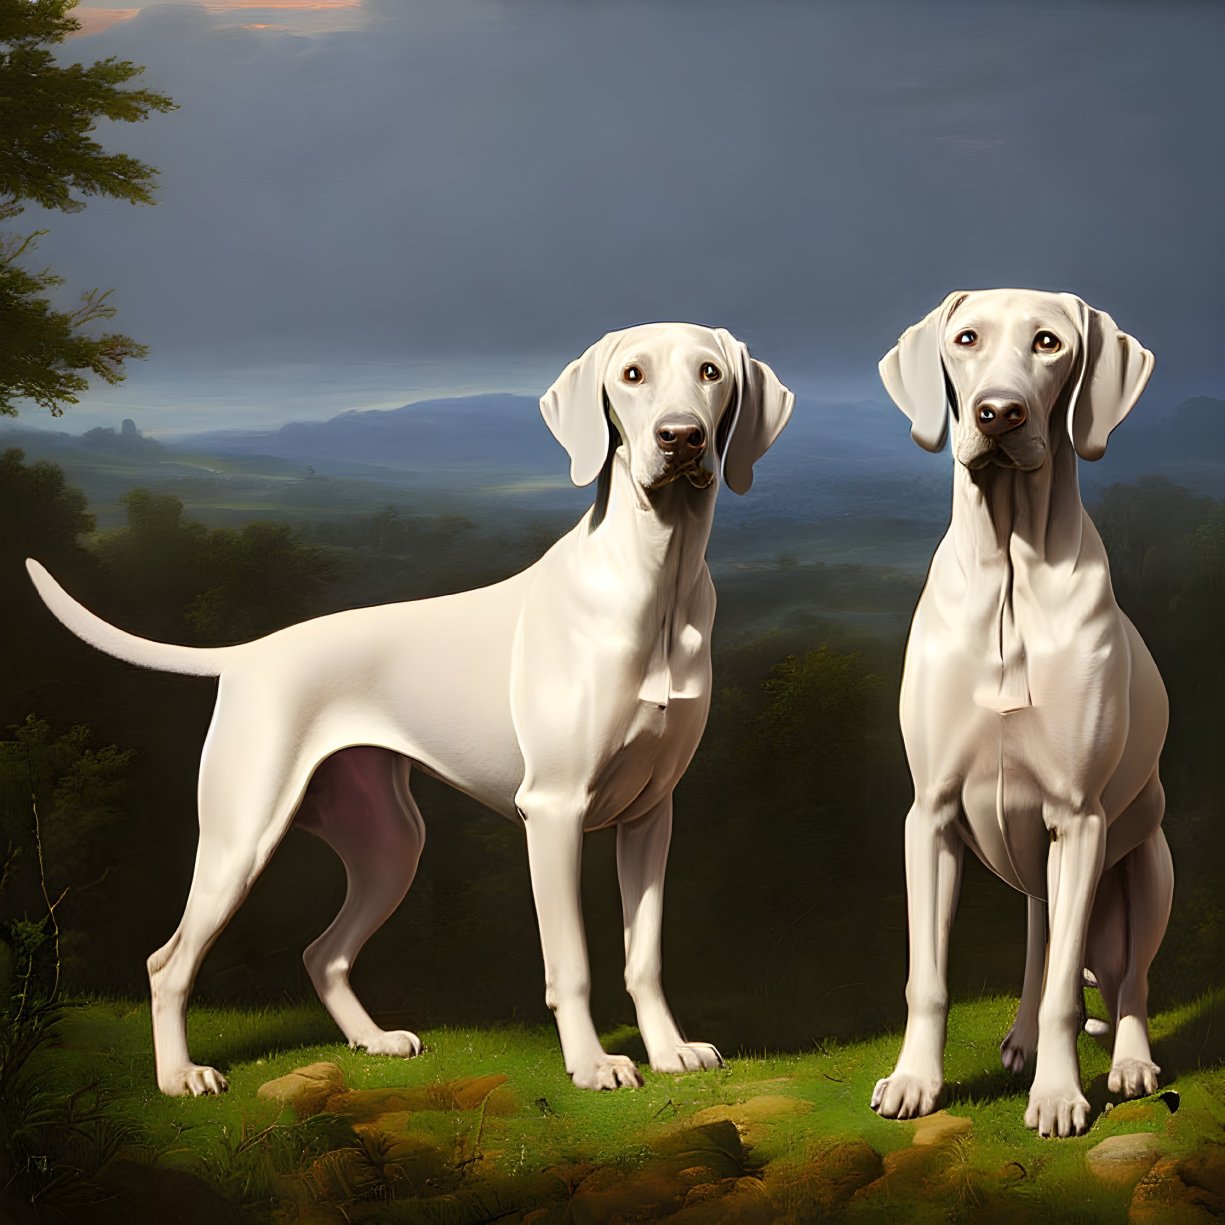 Two White Pointers in Natural Landscape with Dusky Sky